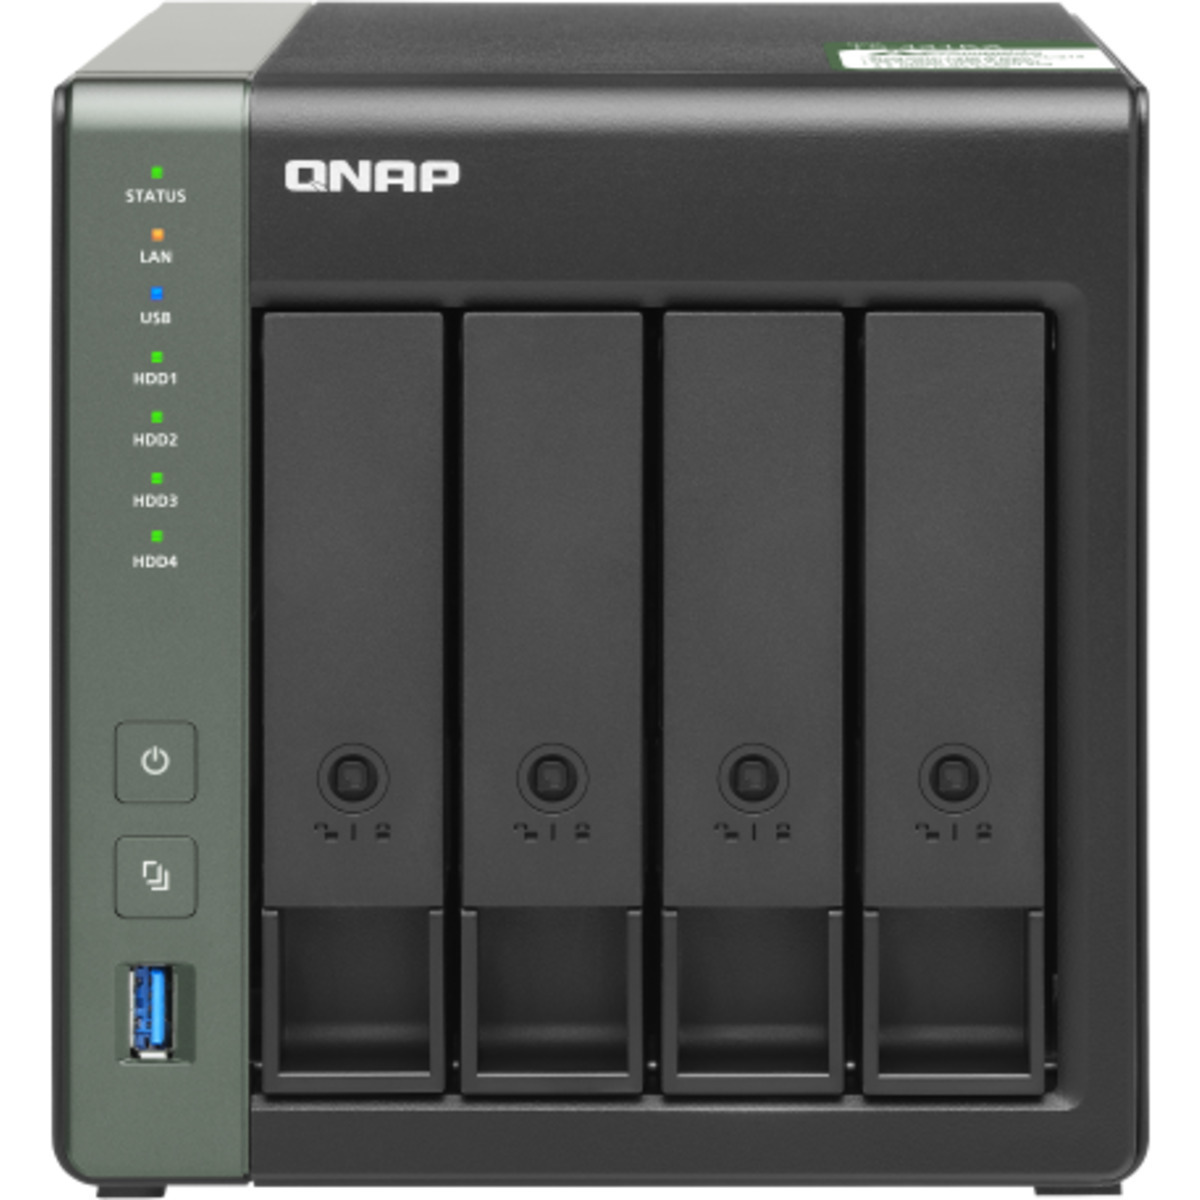 buy QNAP TS-431KX 88tb Desktop NAS - Network Attached Storage Device 4x22000gb Seagate IronWolf Pro ST22000NT001 3.5 7200rpm SATA 6Gb/s HDD NAS Class Drives Installed - Burn-In Tested - ON SALE - FREE RAM UPGRADE - nas headquarters buy network attached storage server device das new raid-5 free shipping simply usa TS-431KX